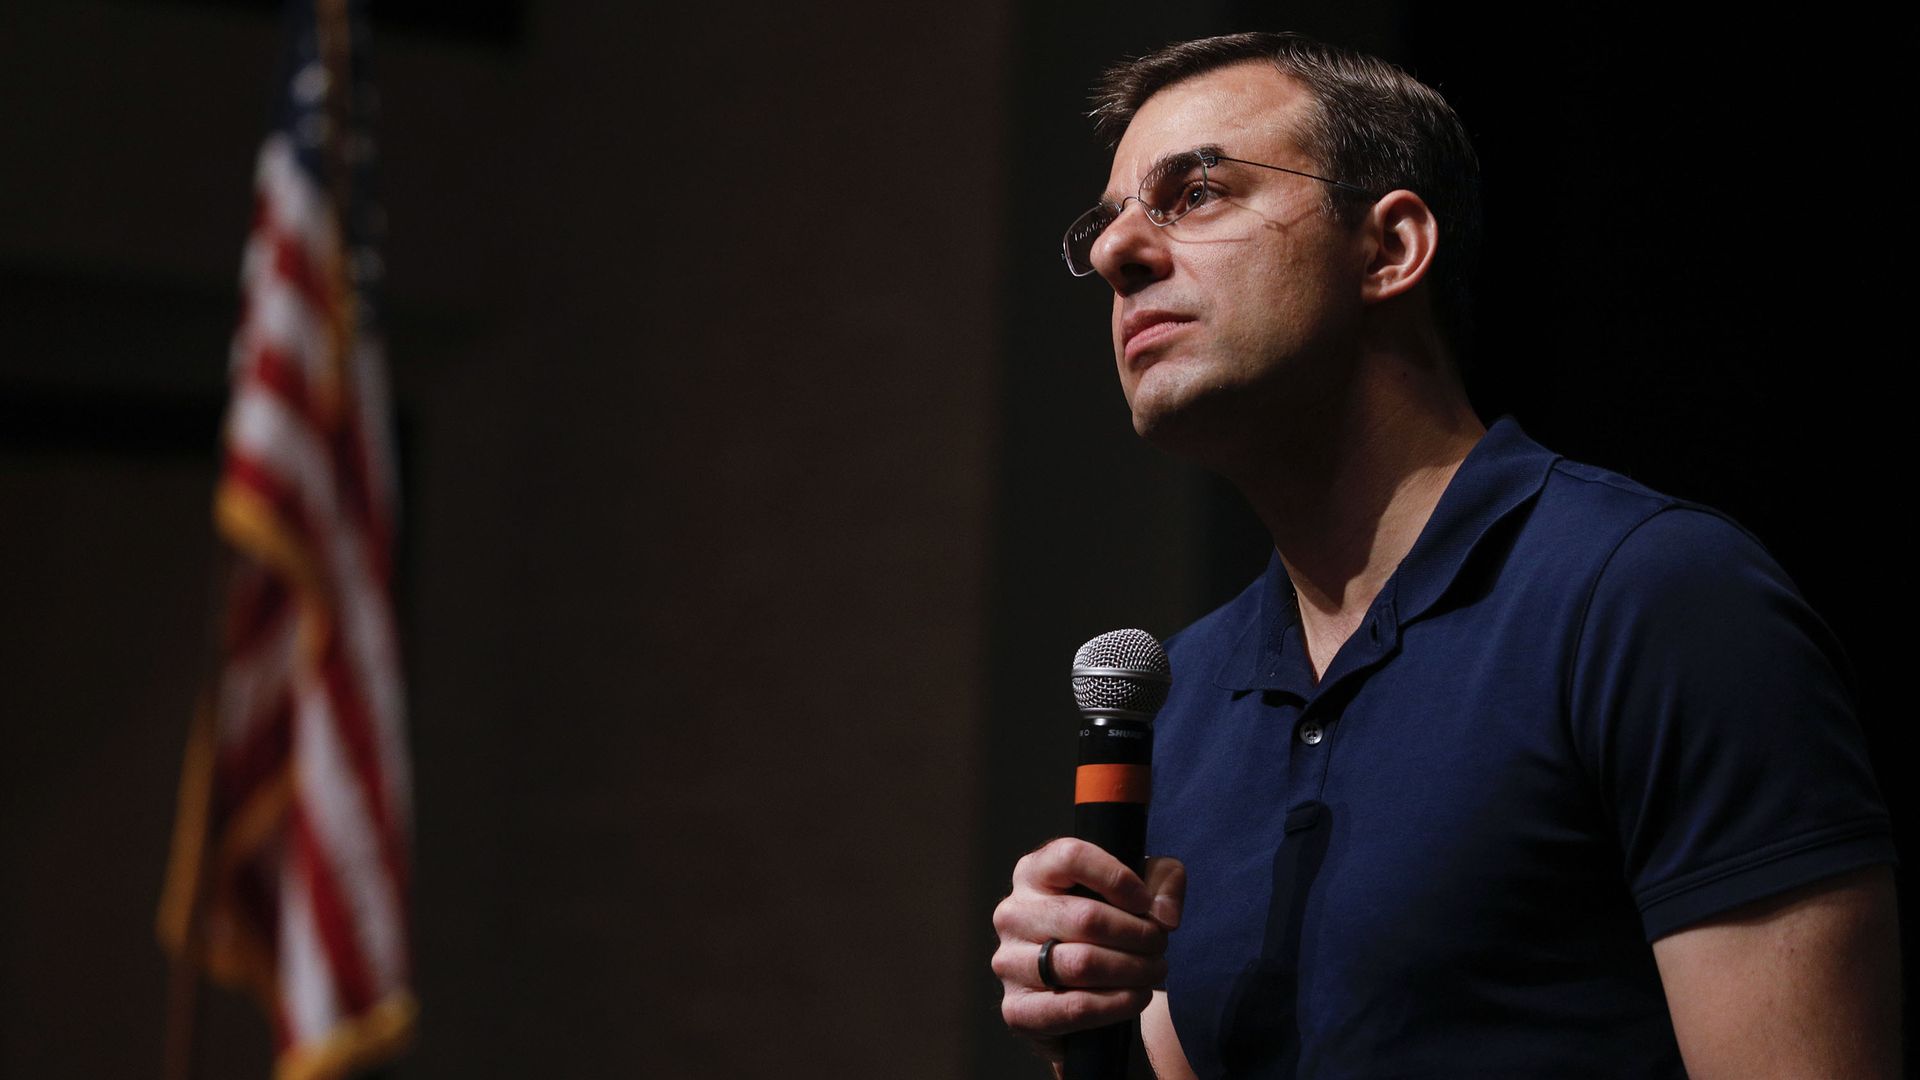 Justin Amash staring into the crowd at a town hall while holding a microphone. There is an American flag in the background and he is wearing a blue polo shirt and glasses. 